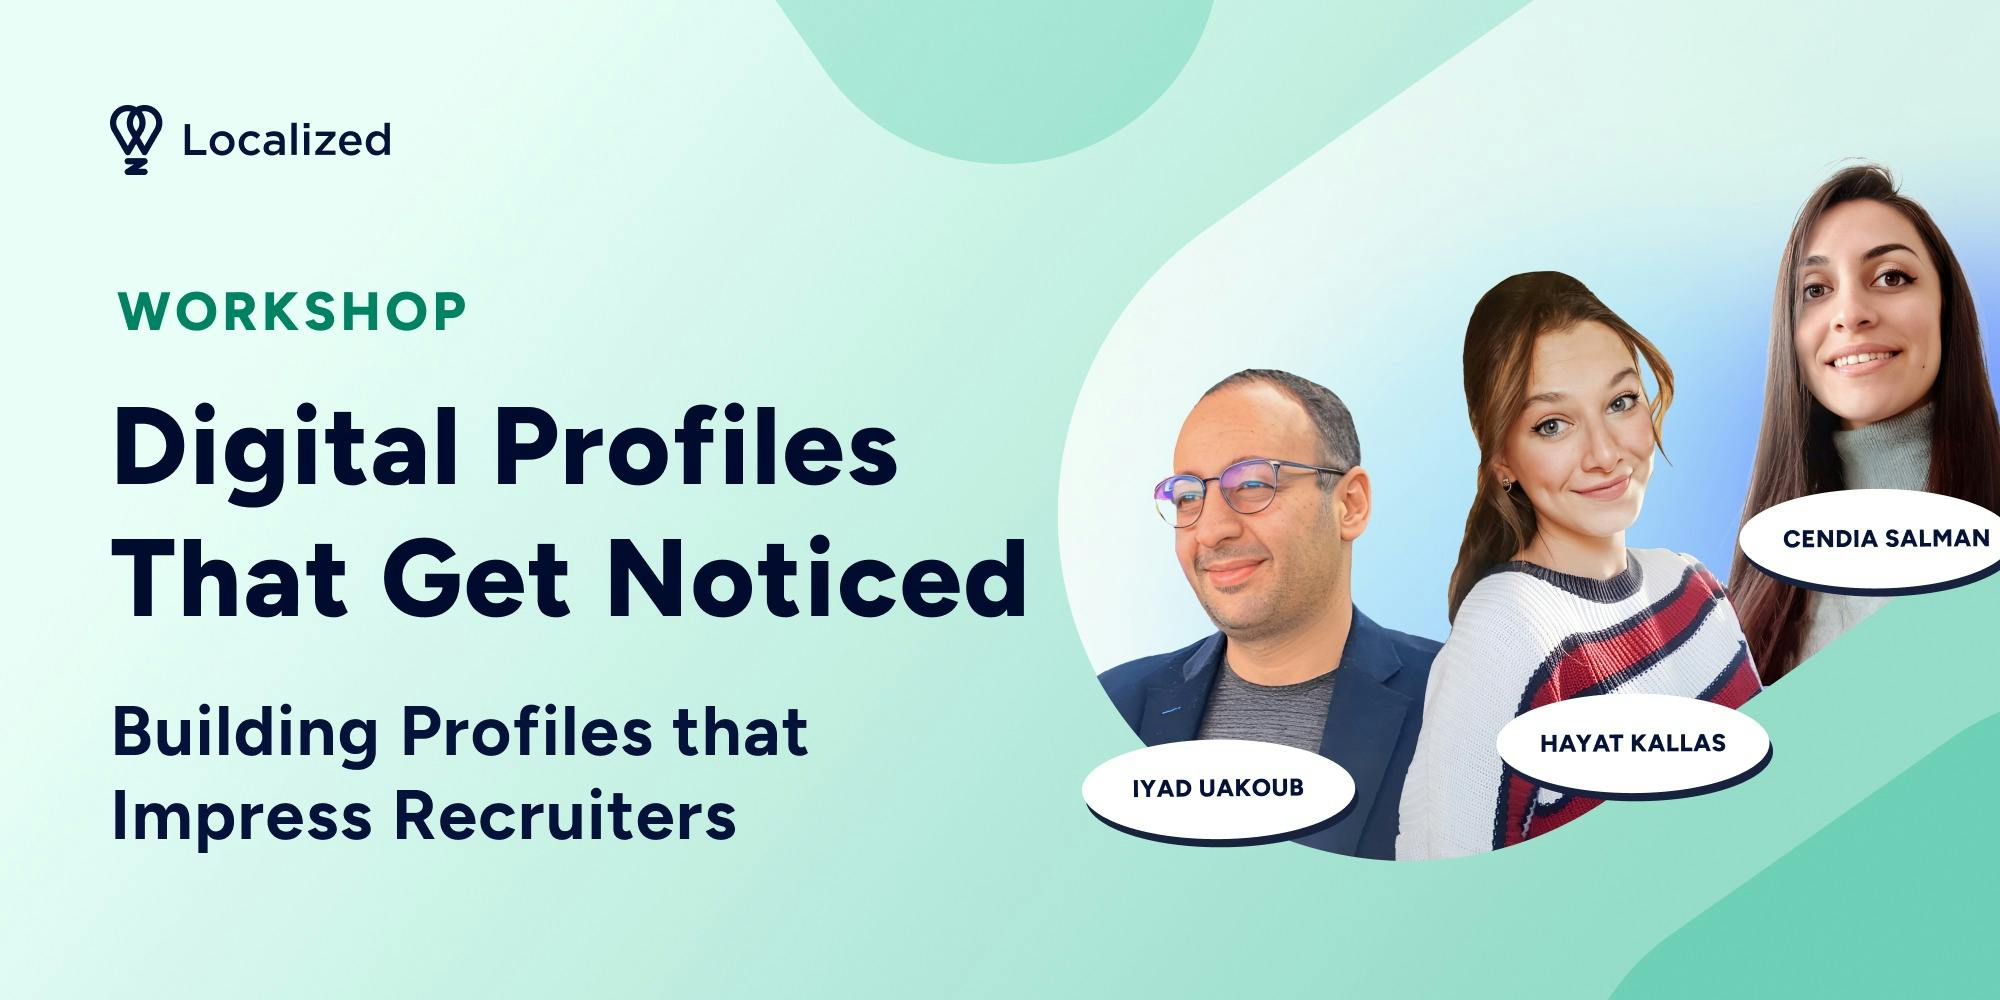 Workshop: Digital Profiles that Get Noticed: Building a Profile that Attracts Recruiters and Secure Interviews